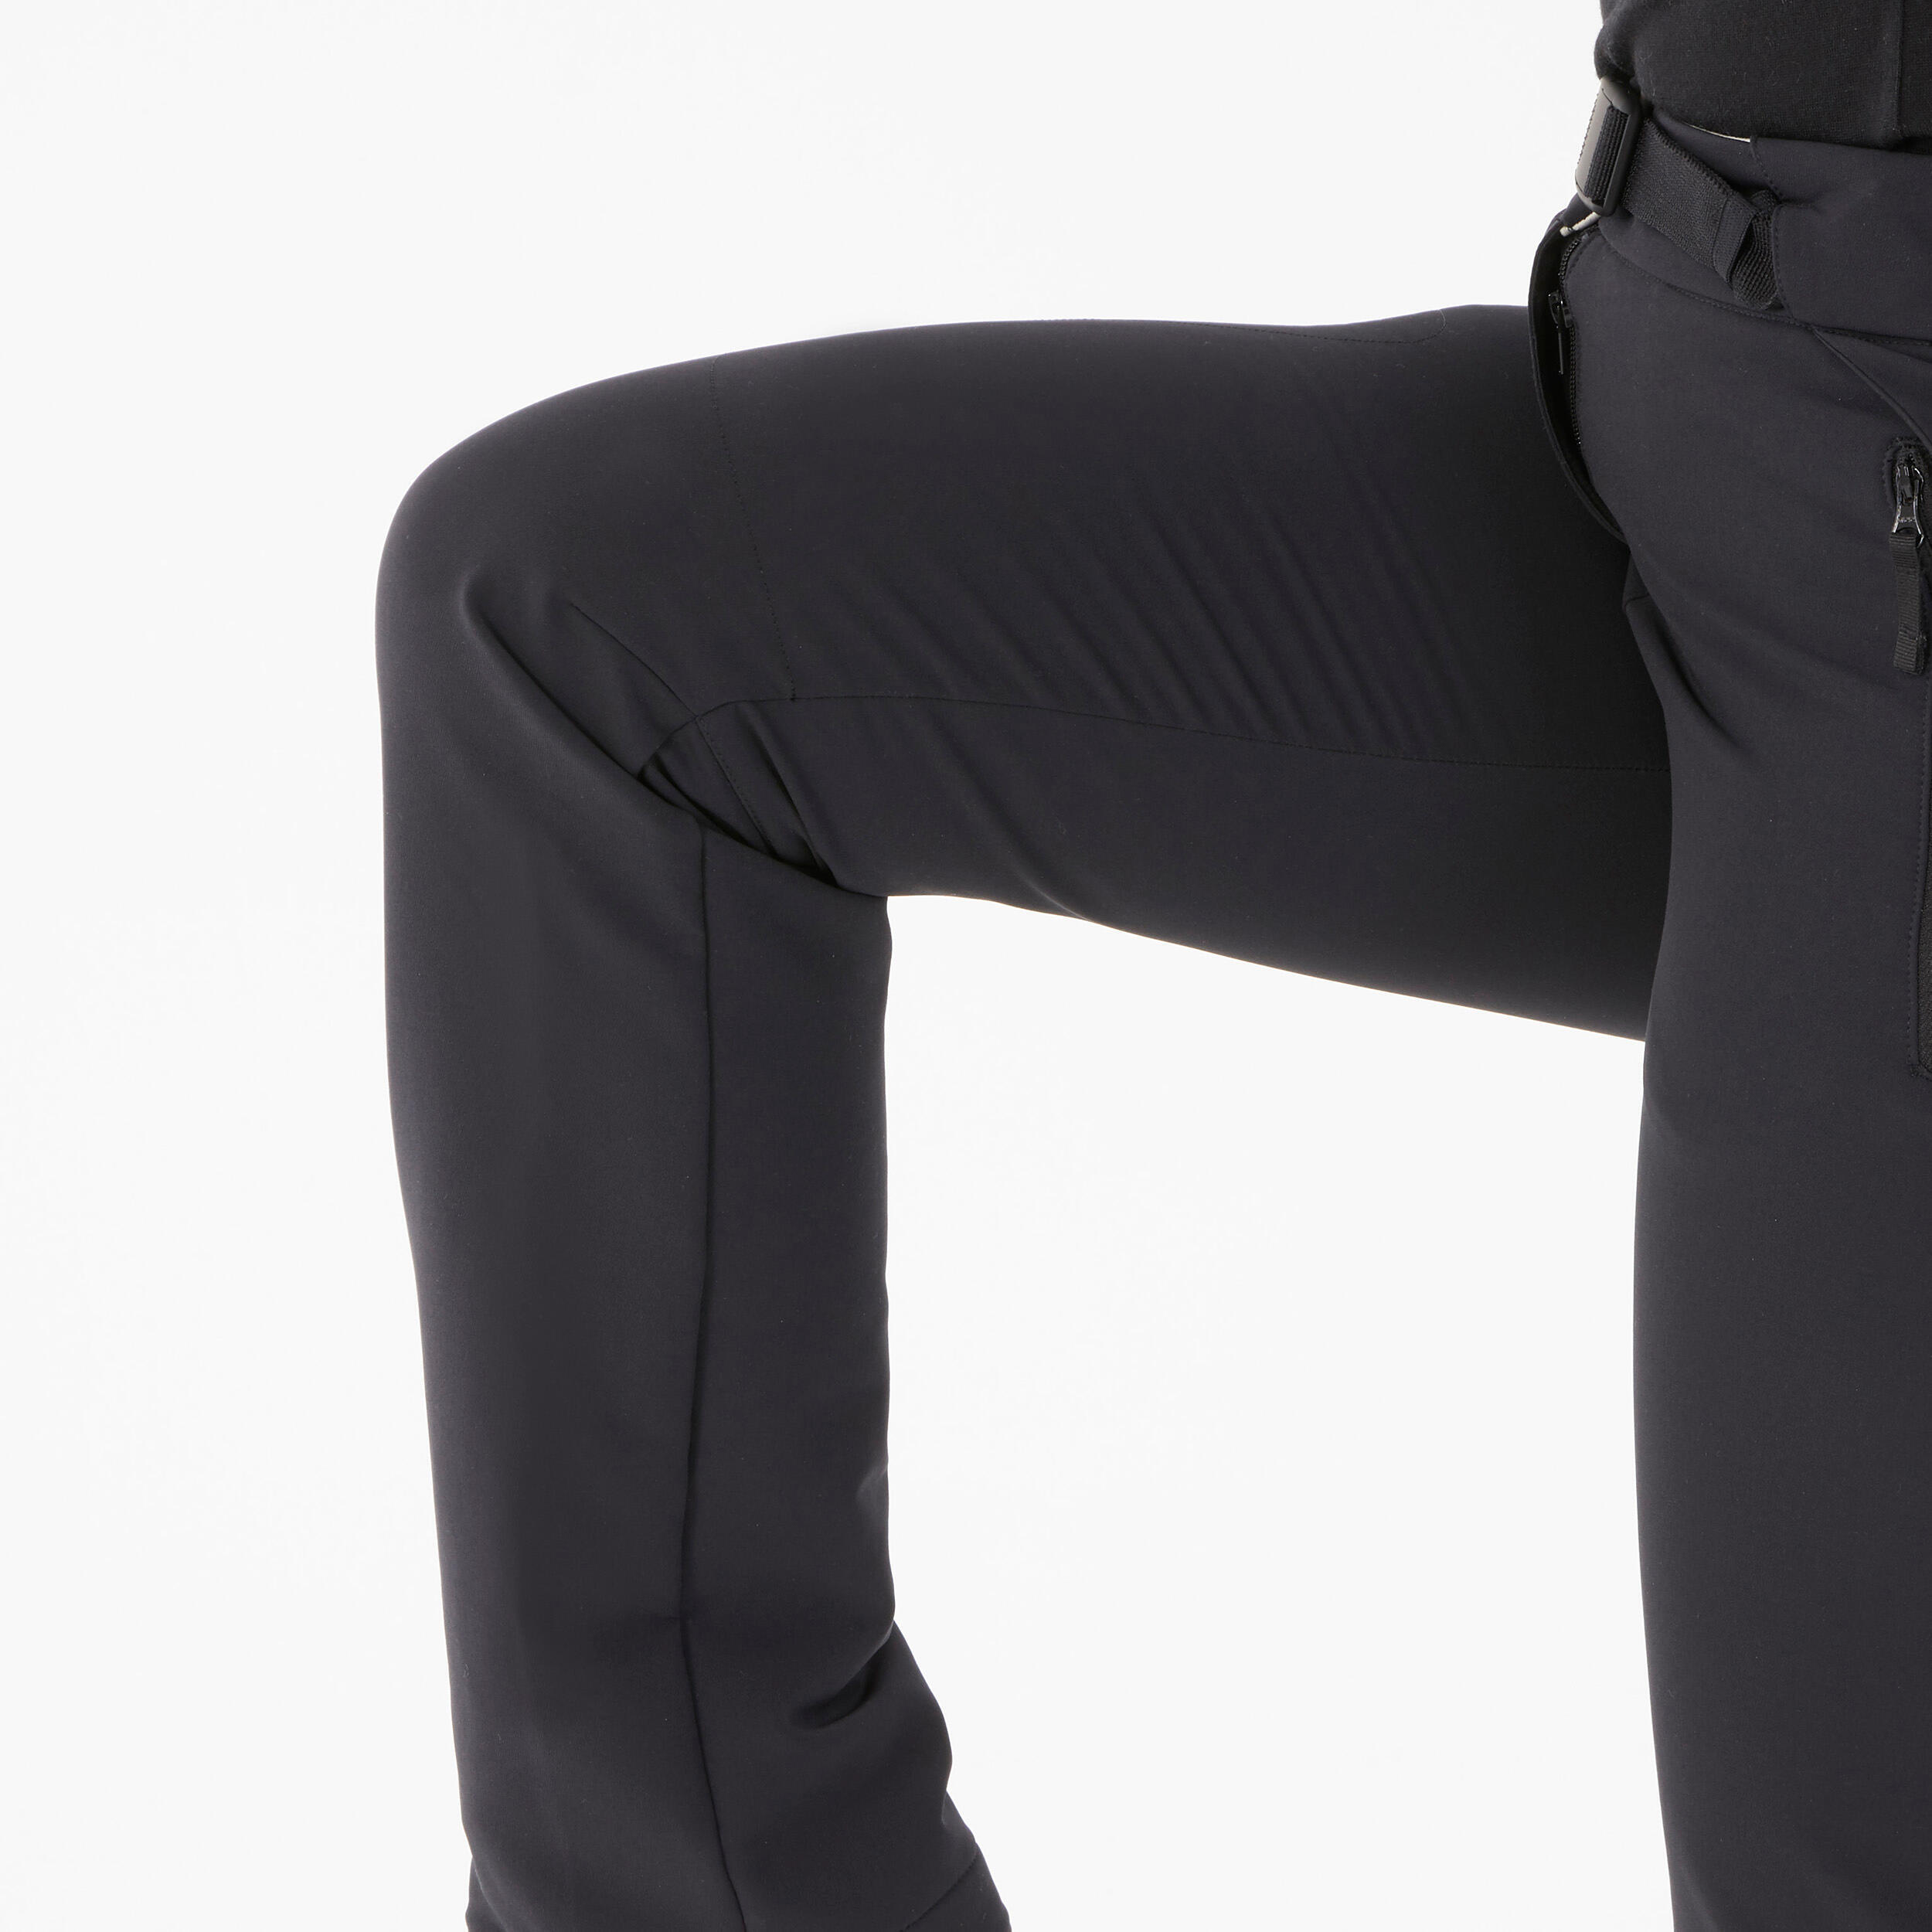 WOMEN'S WARM WATER-REPELLENT SNOW HIKING TROUSERS - SH500 MOUNTAIN 11/17